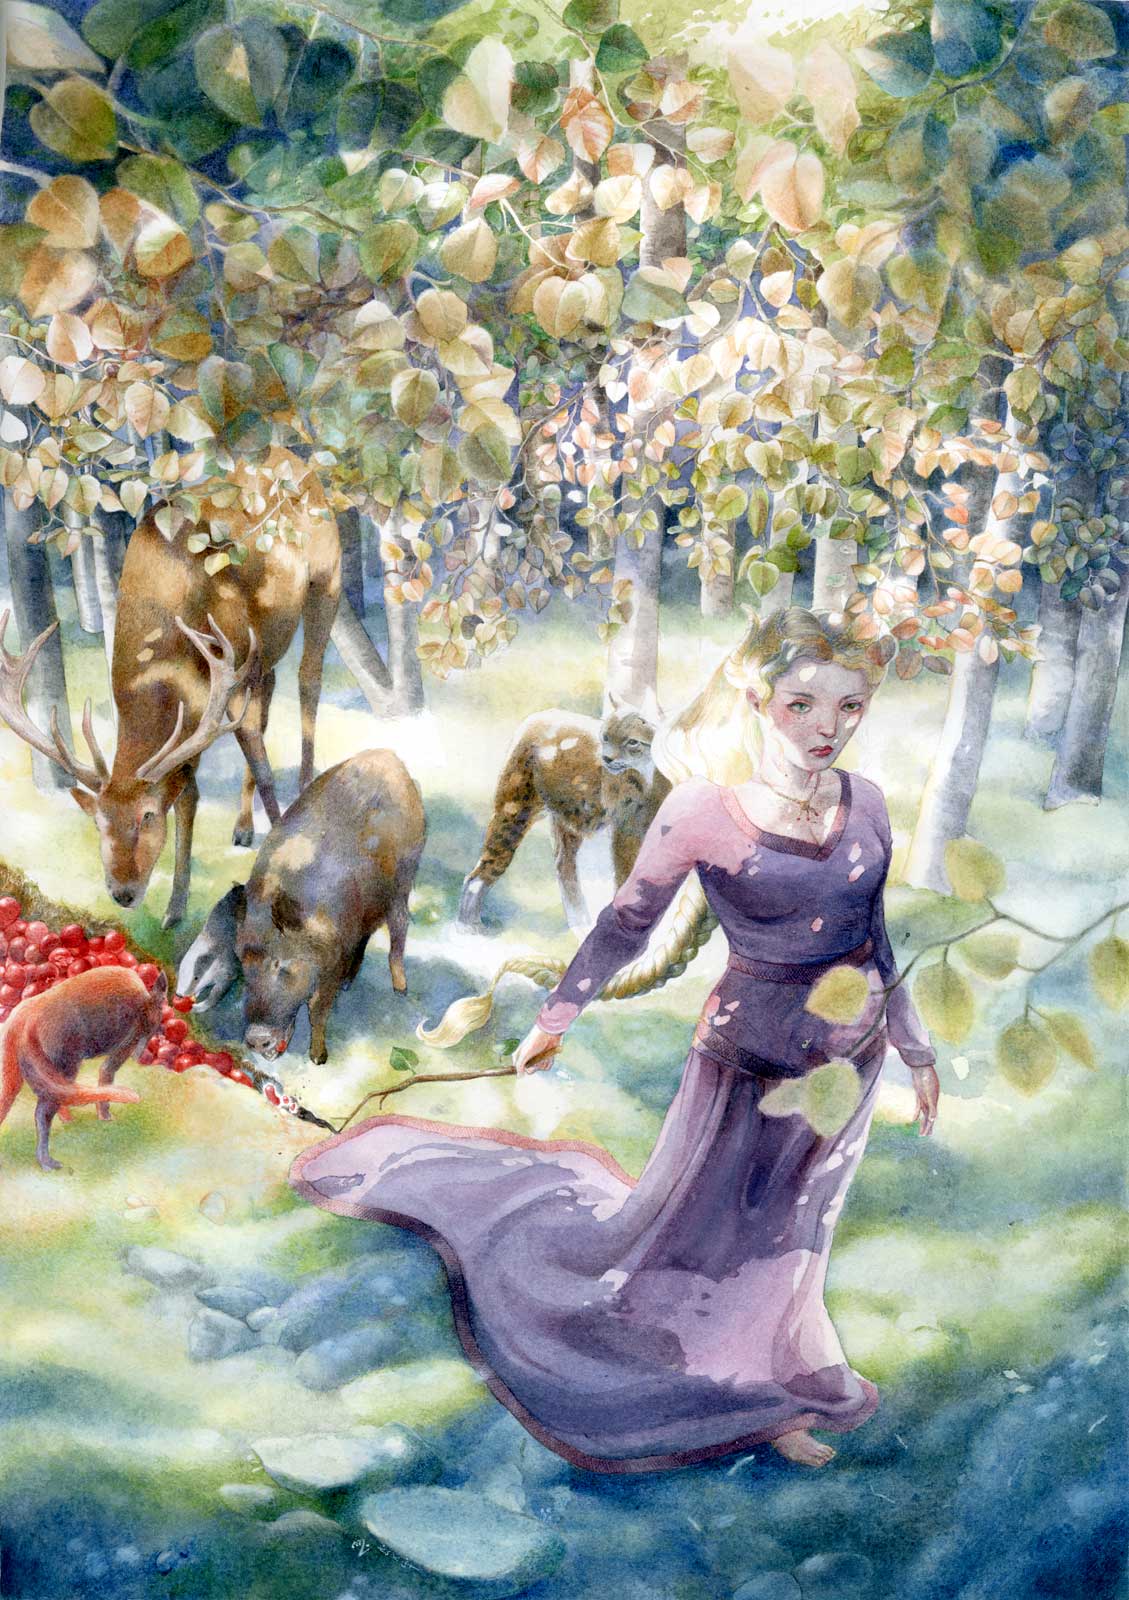 A wood nymph in a medieval gown walks through the forest bringing forth plenty of food for its inhabitants.